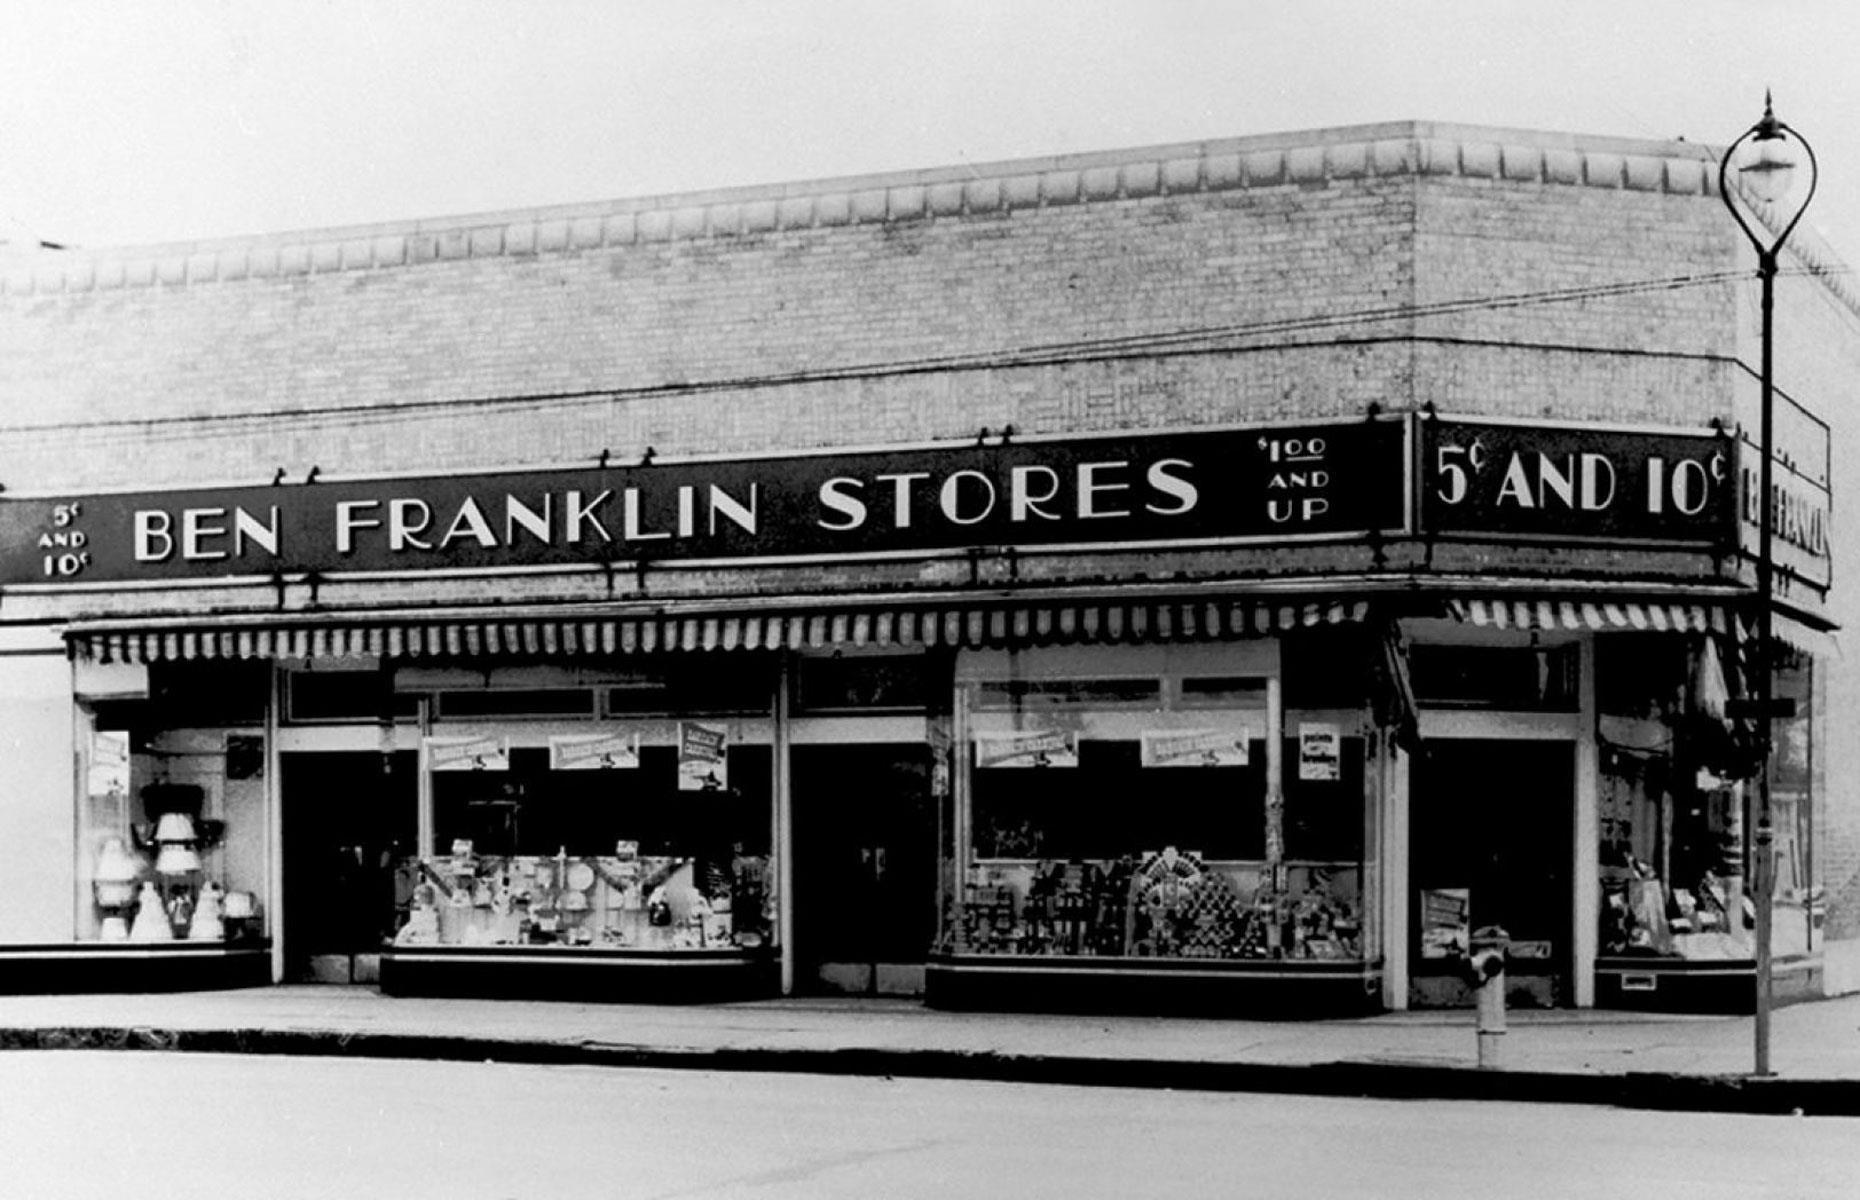 Walmart owes its origin to a franchised five and dime store